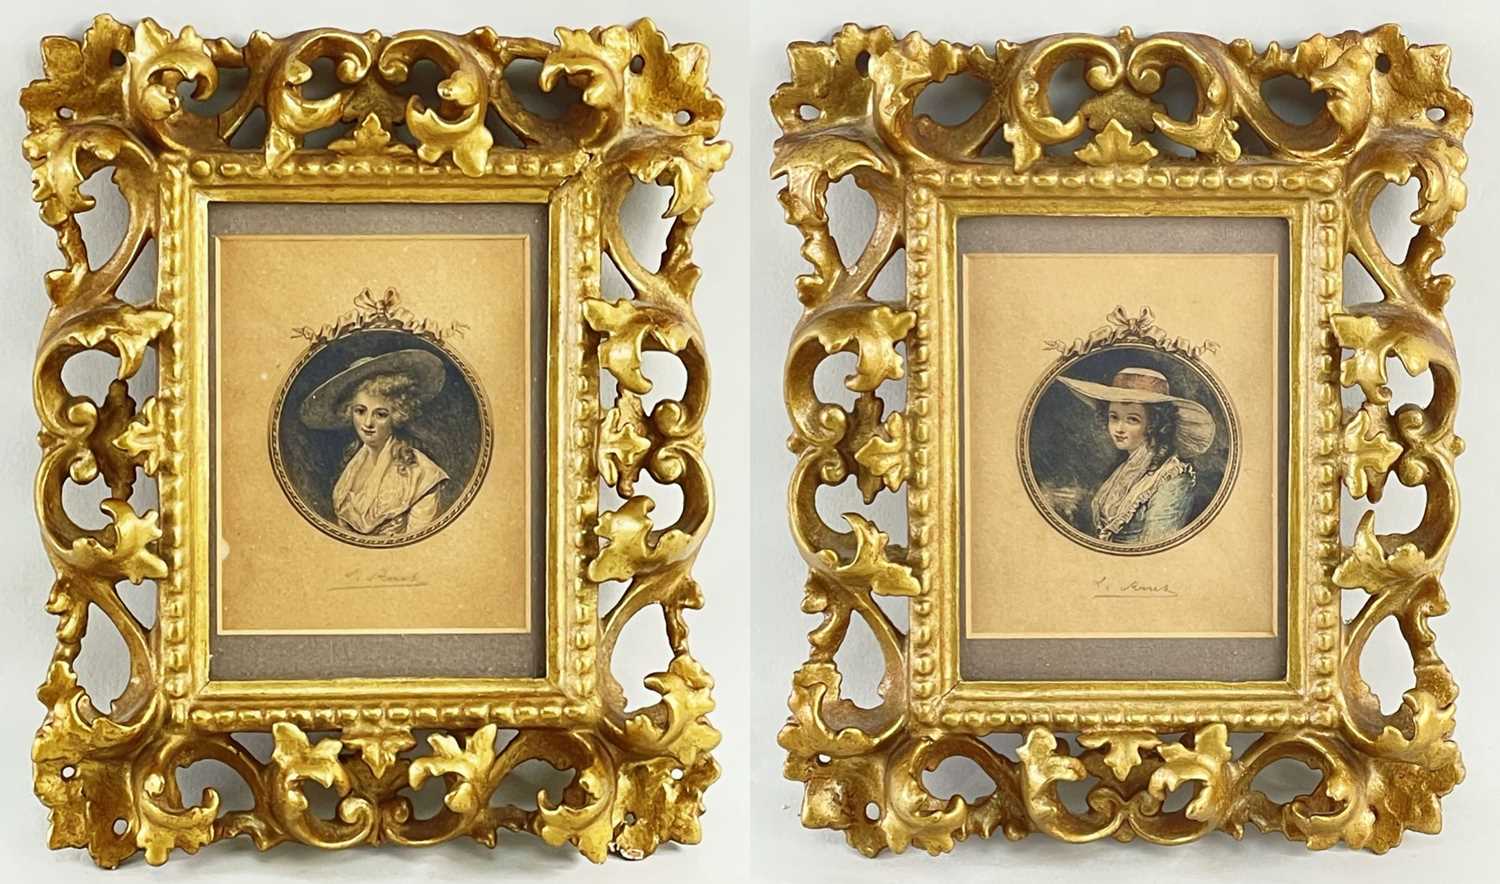 PAIR OF FLORENTINE FRAMED PORTRAIT PRINTS, later hand-coloured, of Lavinia...